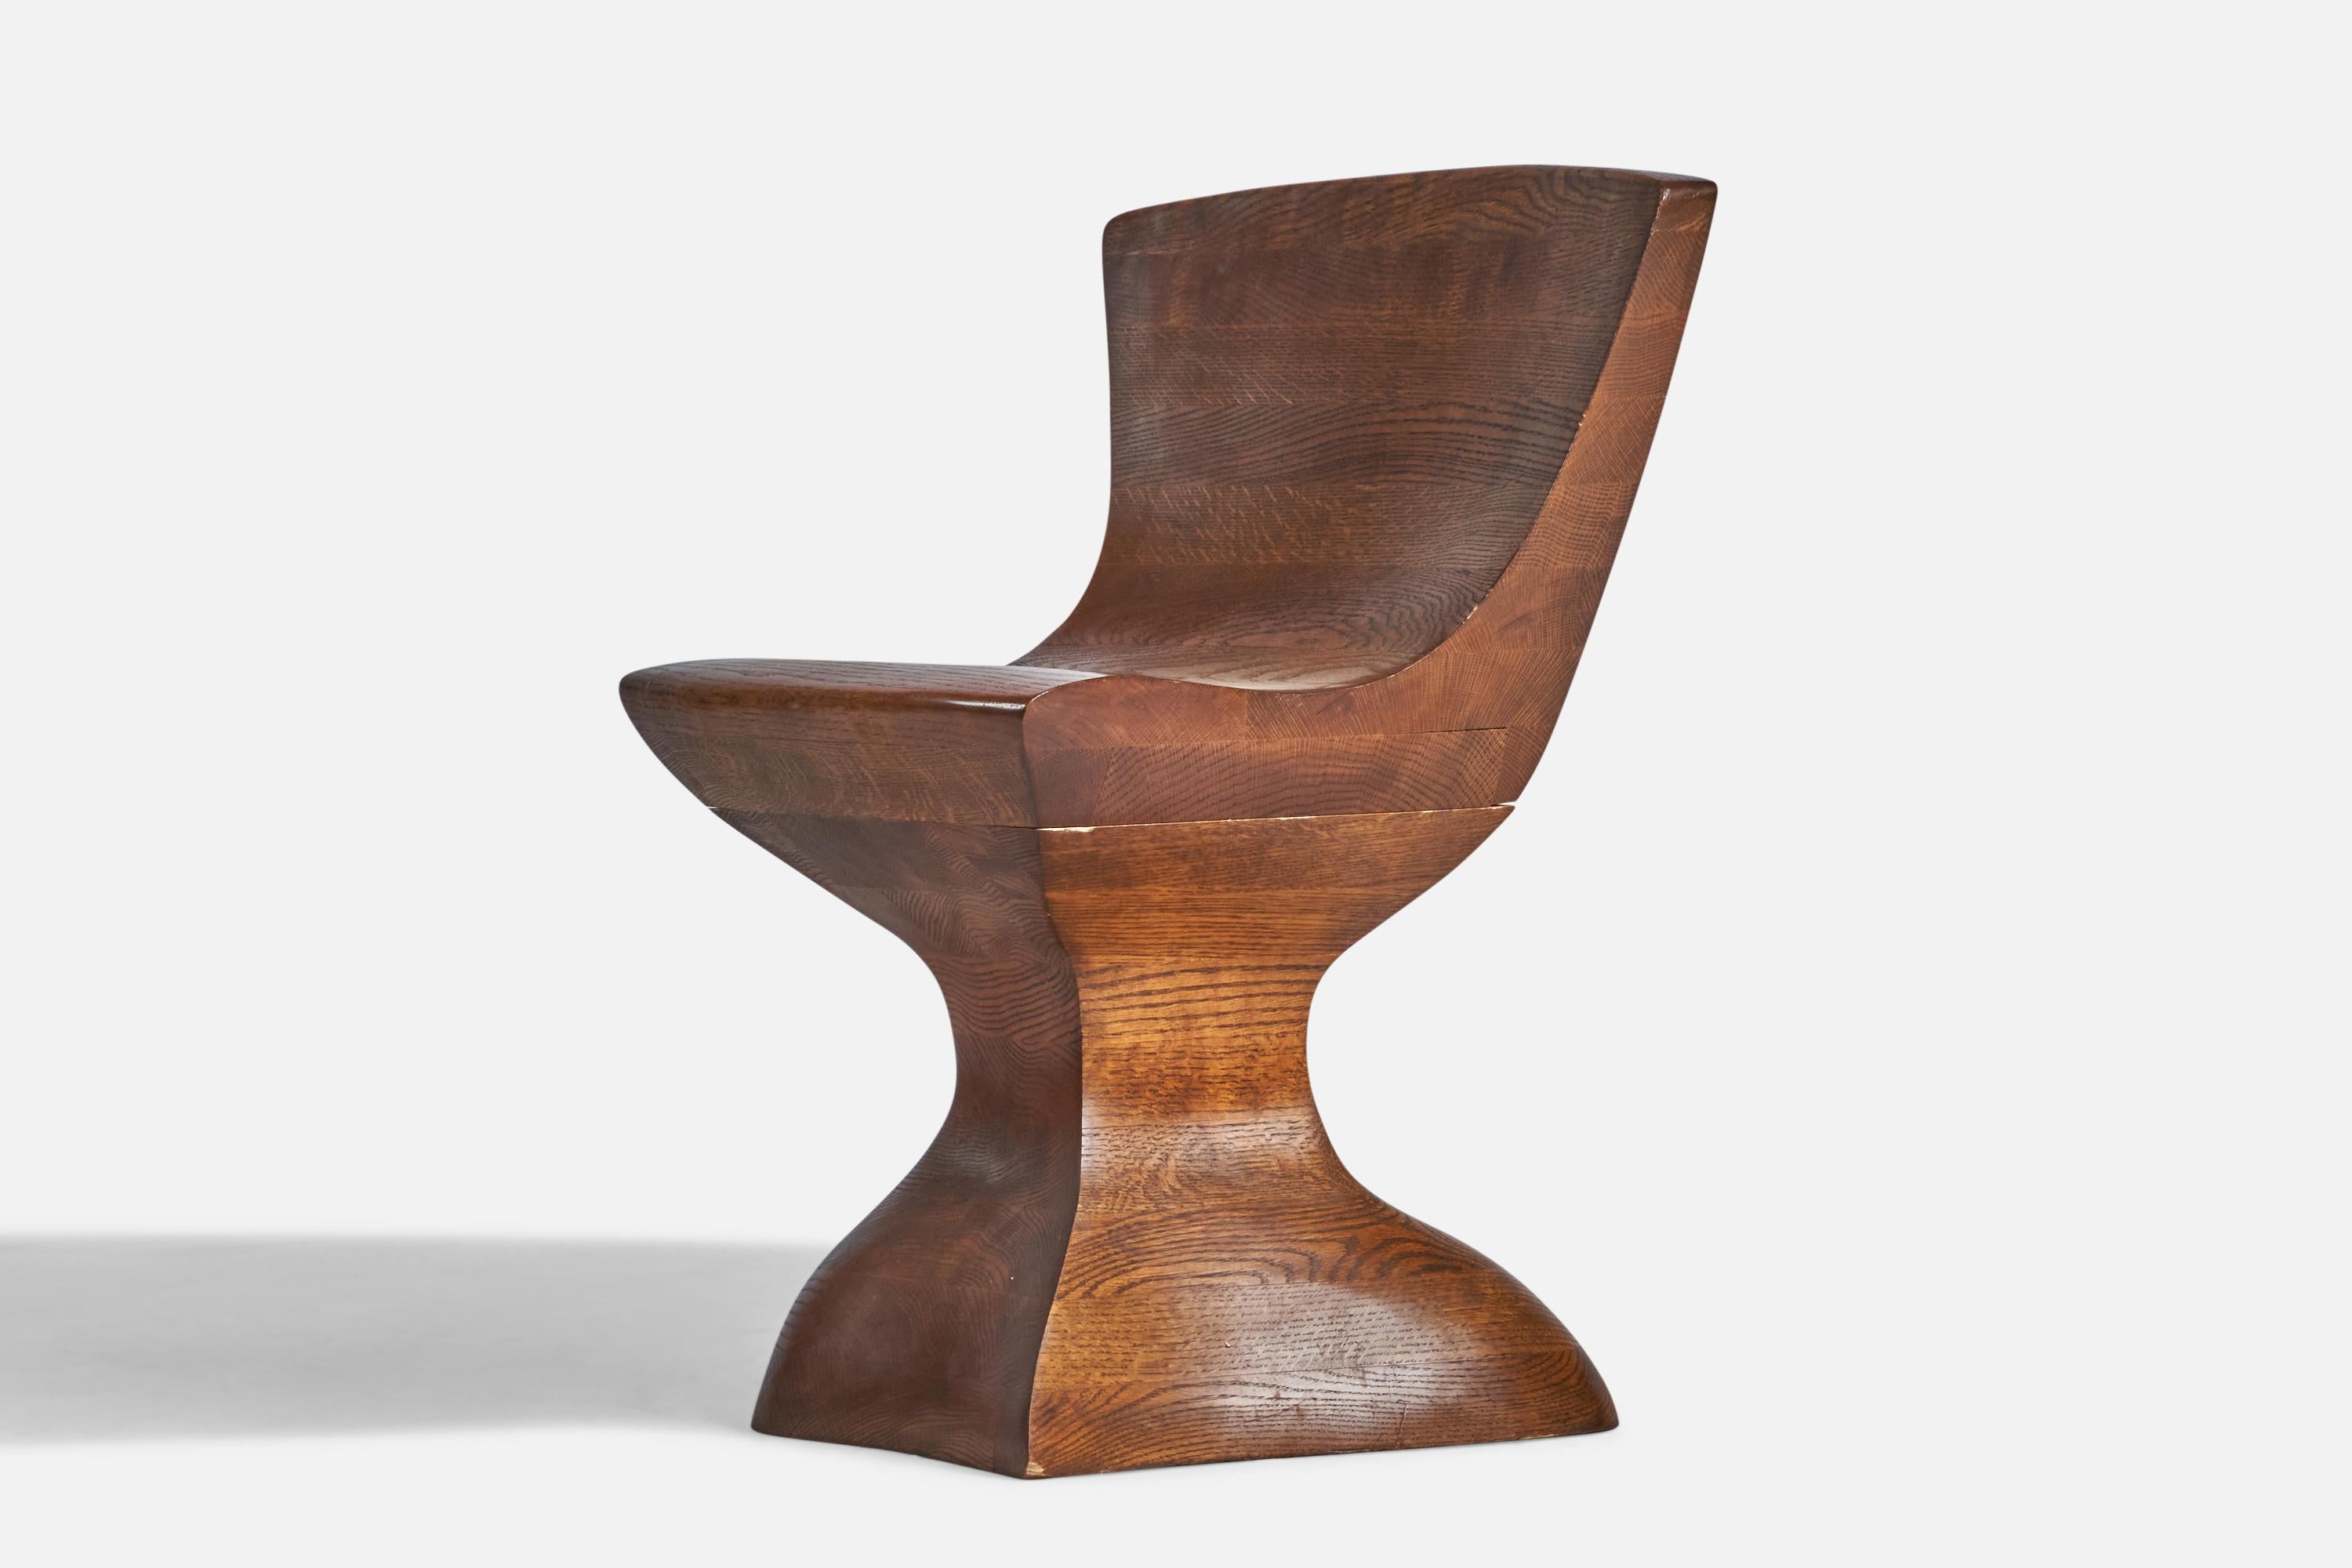 A laminated and carved oak side chair designed and produced in the US, c. 1980s.
16.75” seat height